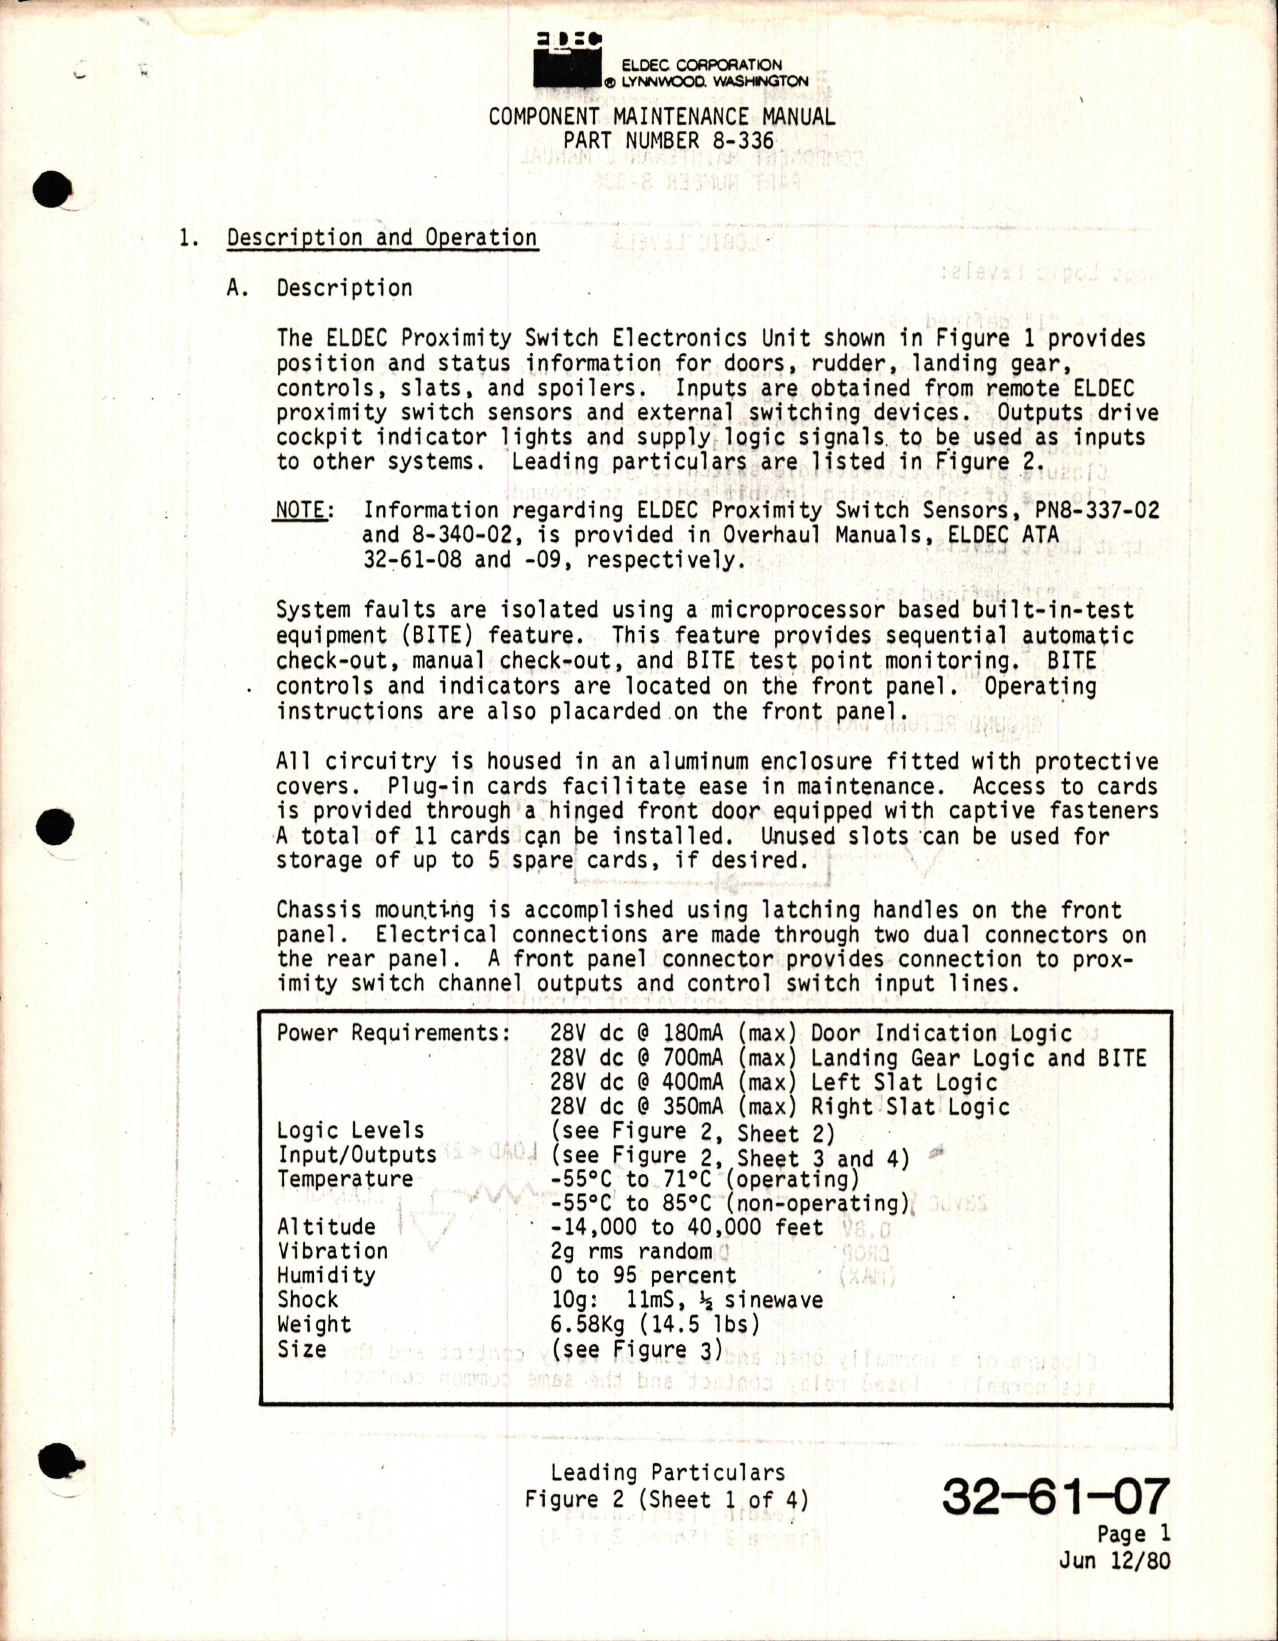 Sample page 8 from AirCorps Library document: Maintenance Manual with Illustrated Parts List for Proximity Switch Electronics Unit - Part 8-336-02